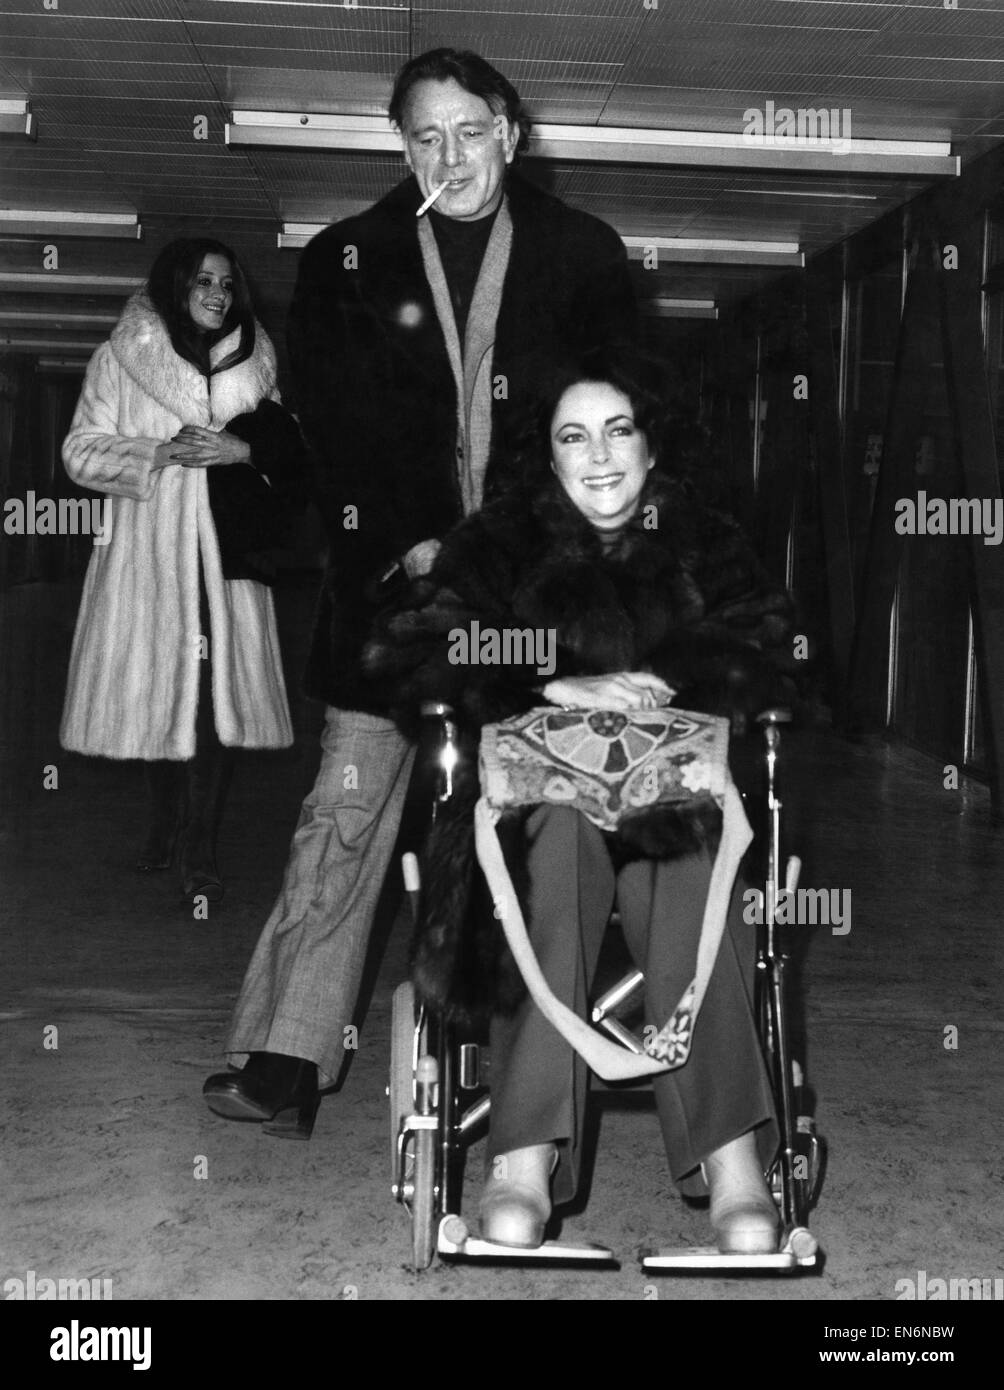 Elizabeth Taylor and Richard Burton Pictured at Heathrow Airport. December 1975 Stock Photo